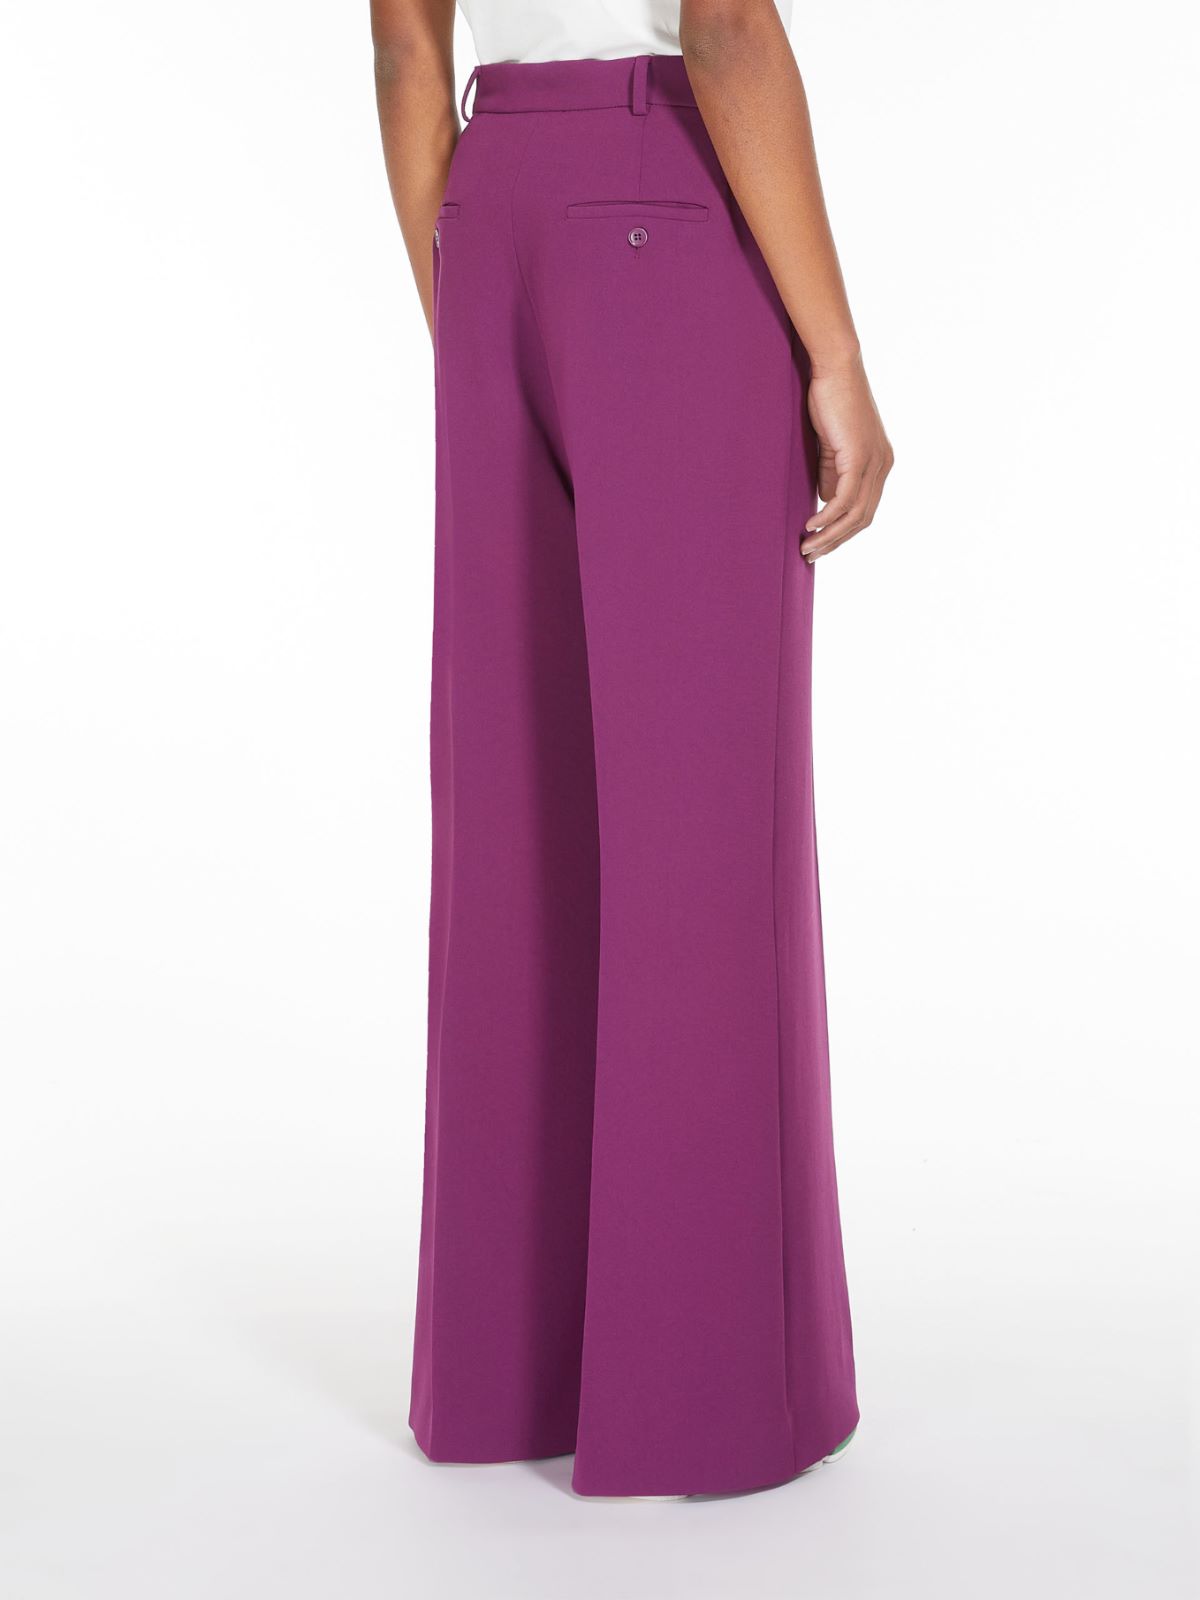 Bell bottom trousers in cady - BORDEAUX - Weekend Max Mara - 3